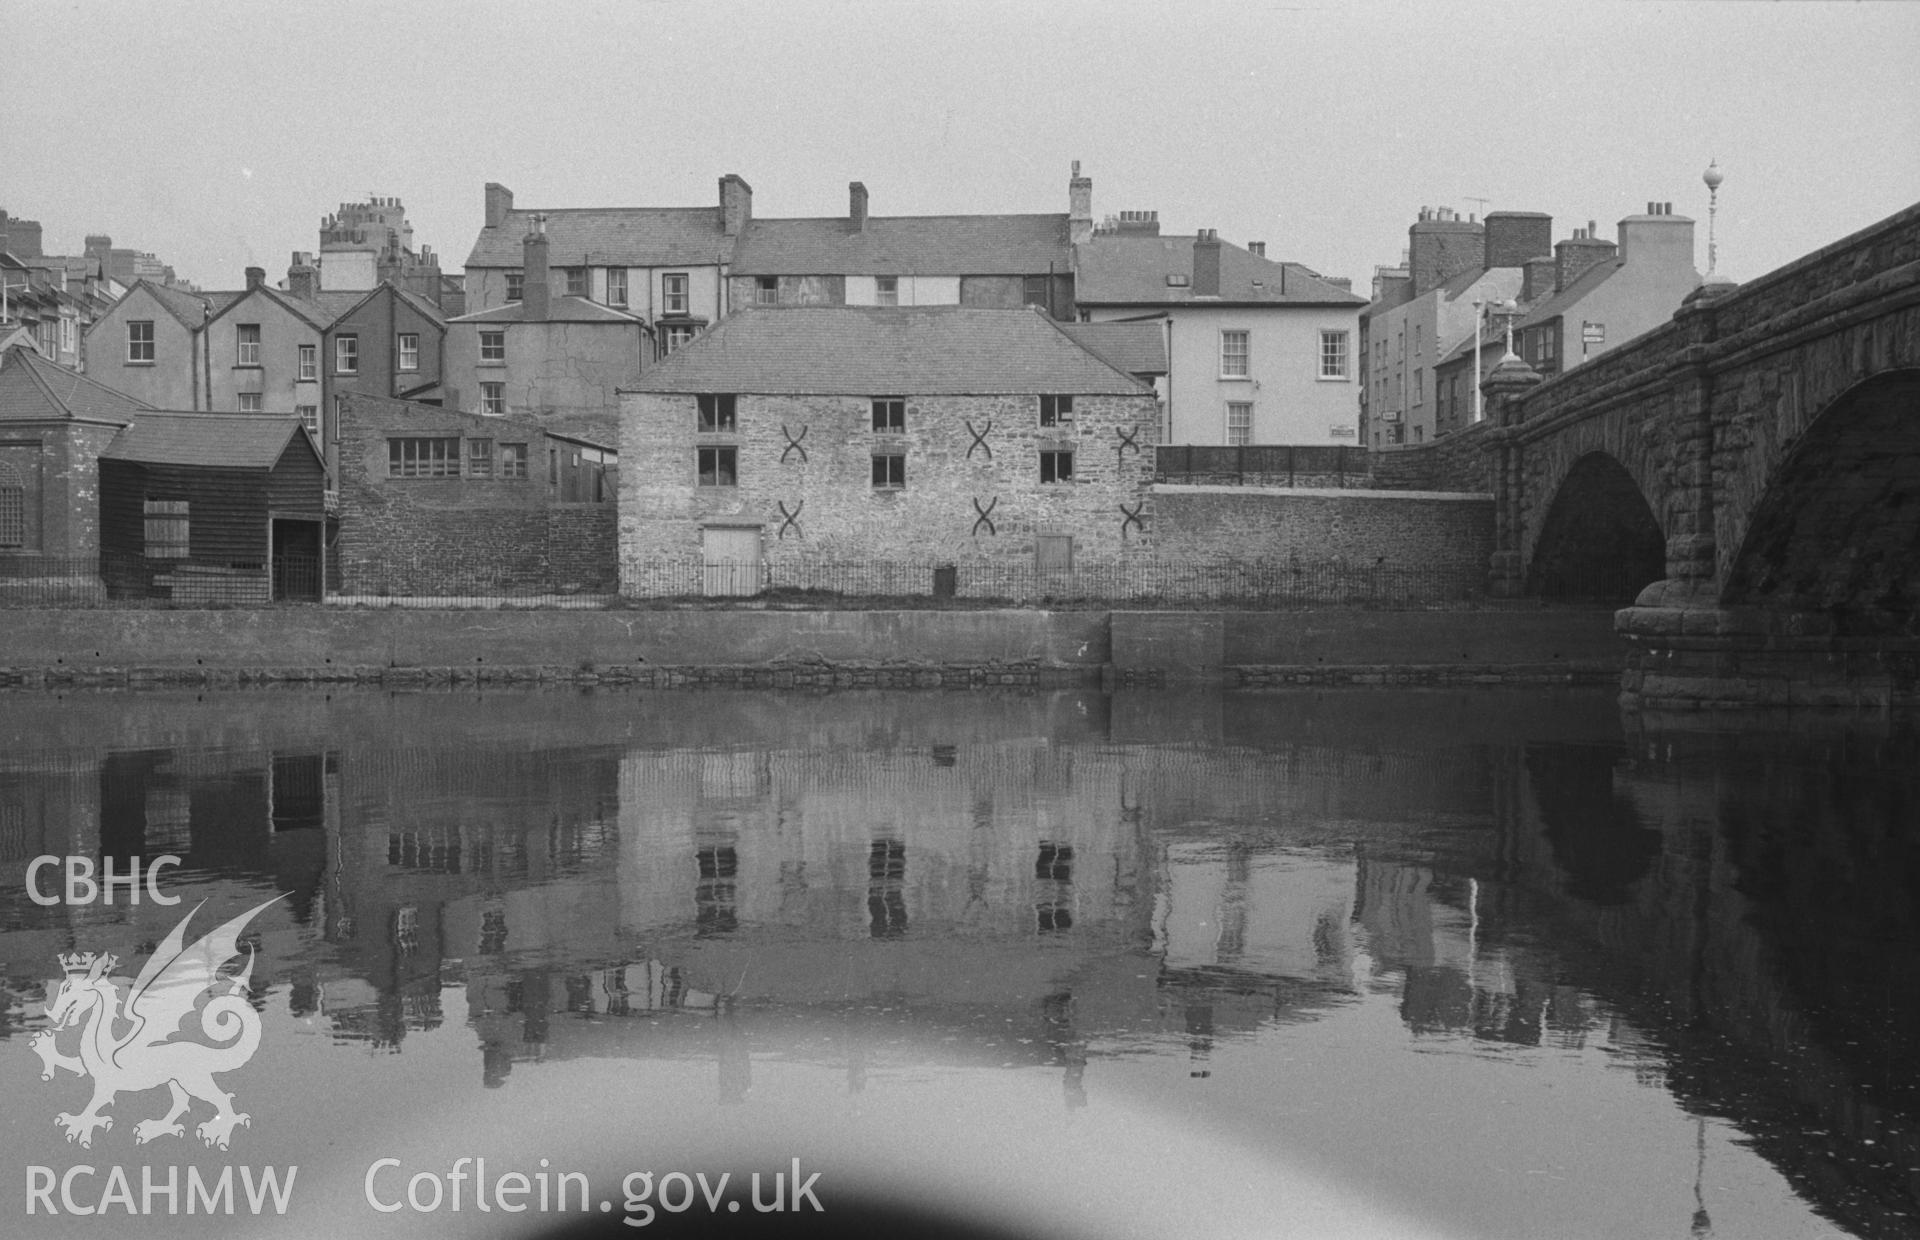 Digital copy of black & white negative showing Aberystwyth harbour with Miliquhan's warehouse and Trefechan Bridge. Photographed by Arthur O. Chater in April 1967 looking north across the harbour just below Trefechan Bridge from Grid Reference SN 583 814.